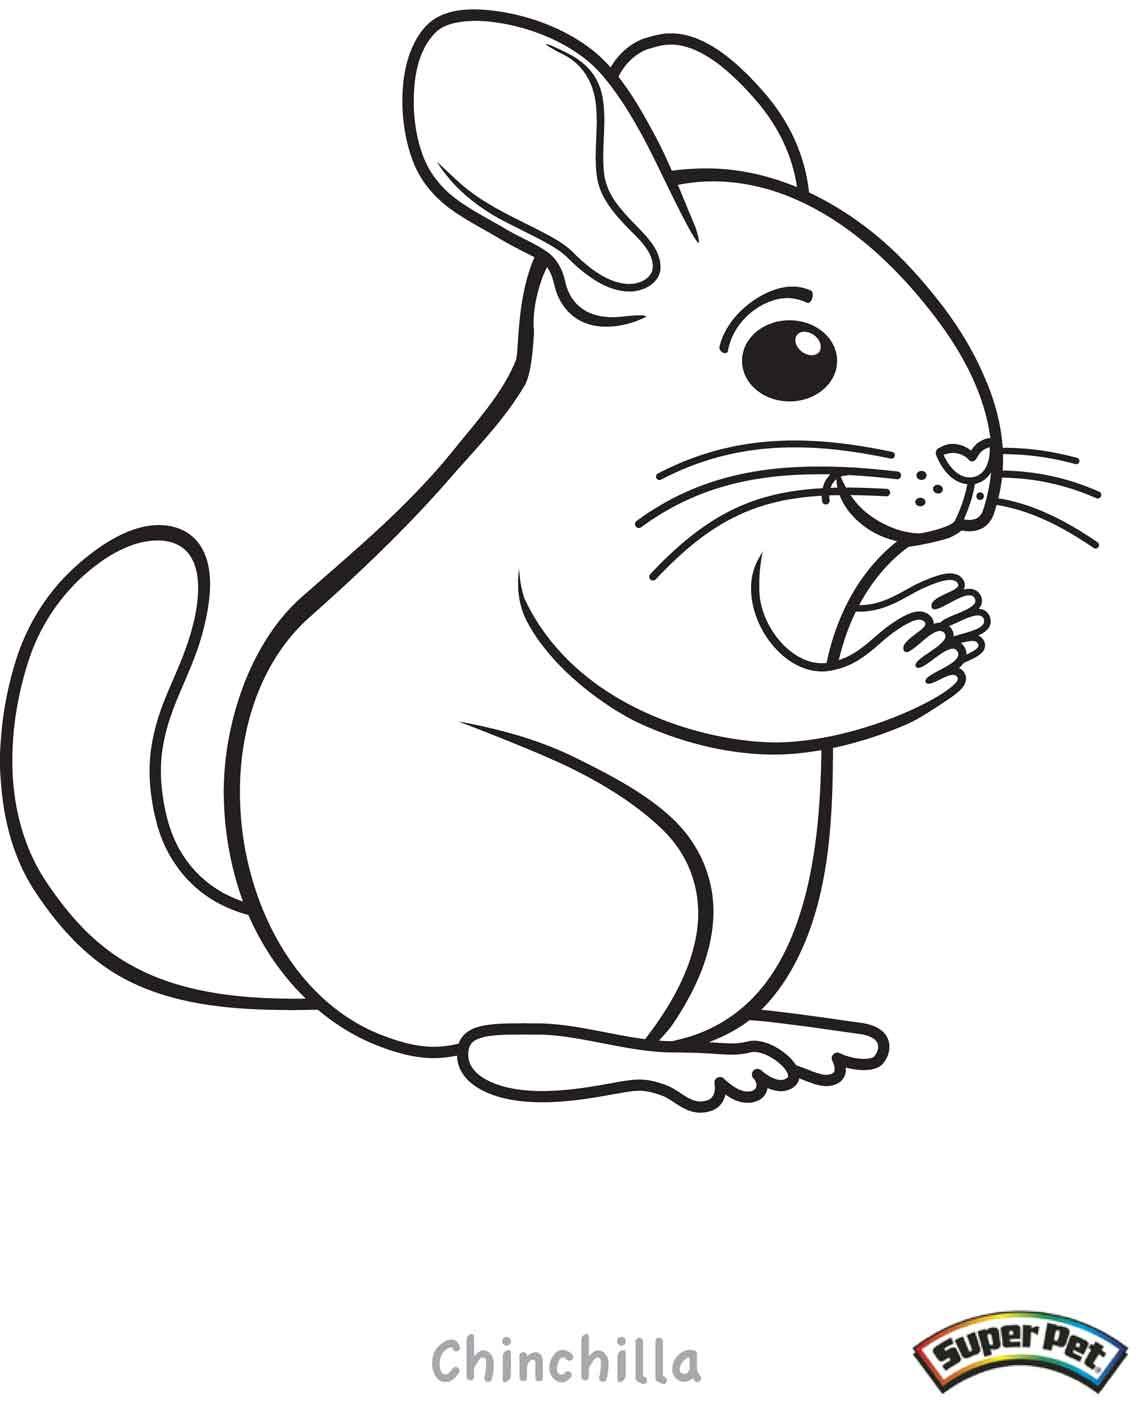 Coloring Pages of Little Chinchillas (Page 3) - Line.17QQ.com